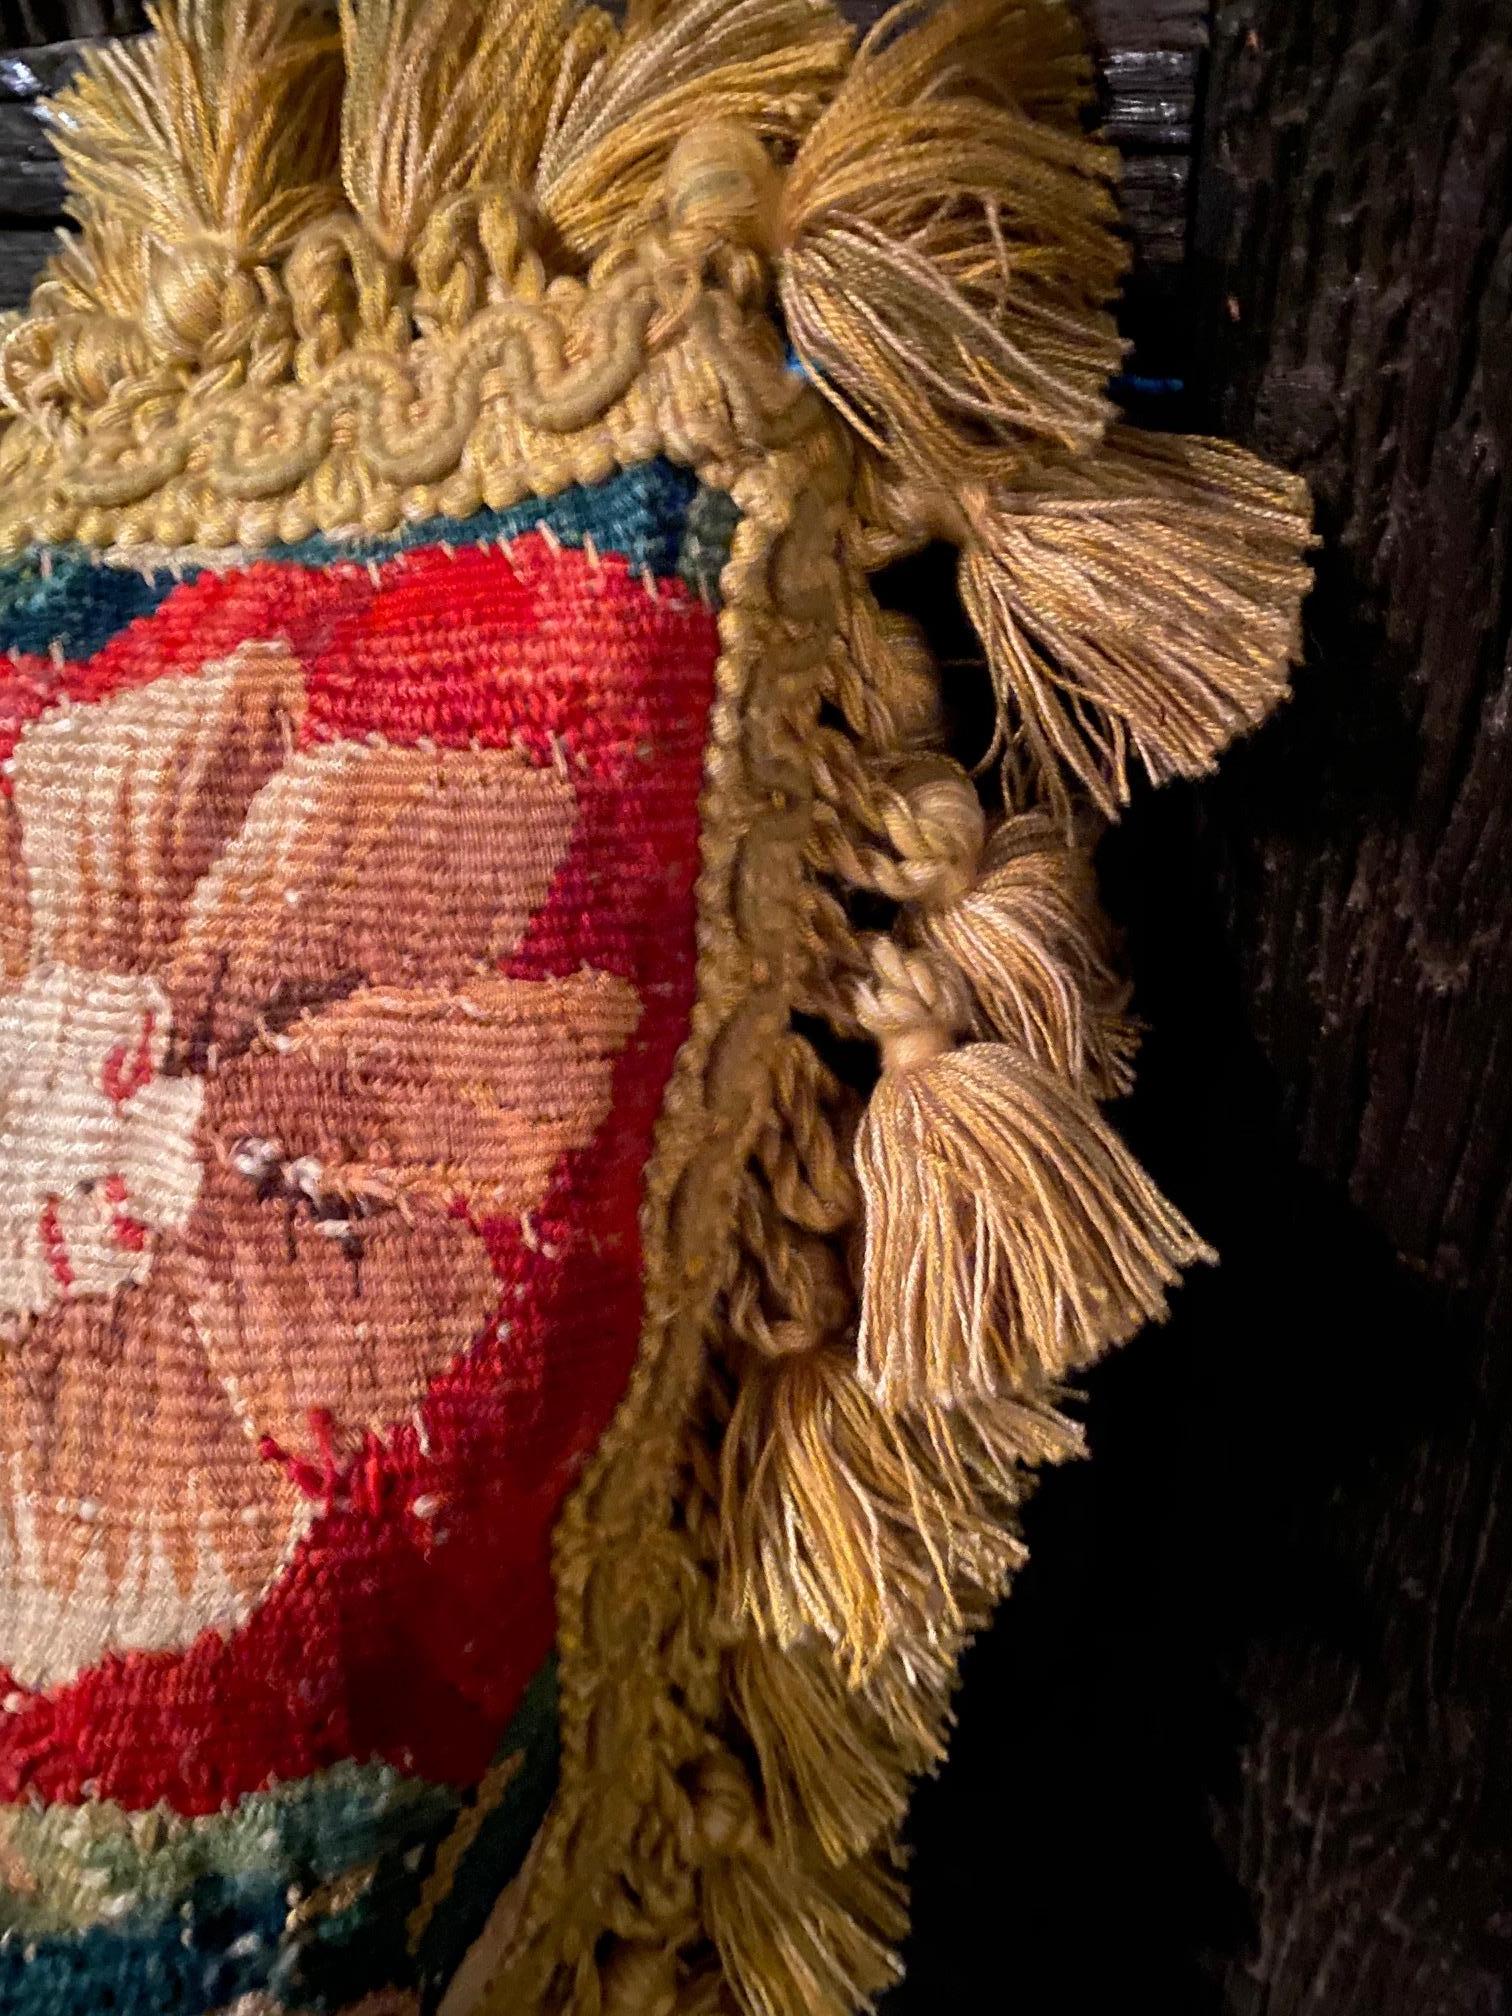 Impressive large, colorful early 18th century Aubusson tapestry cushion with gold tassel fringe.
Measures: 24